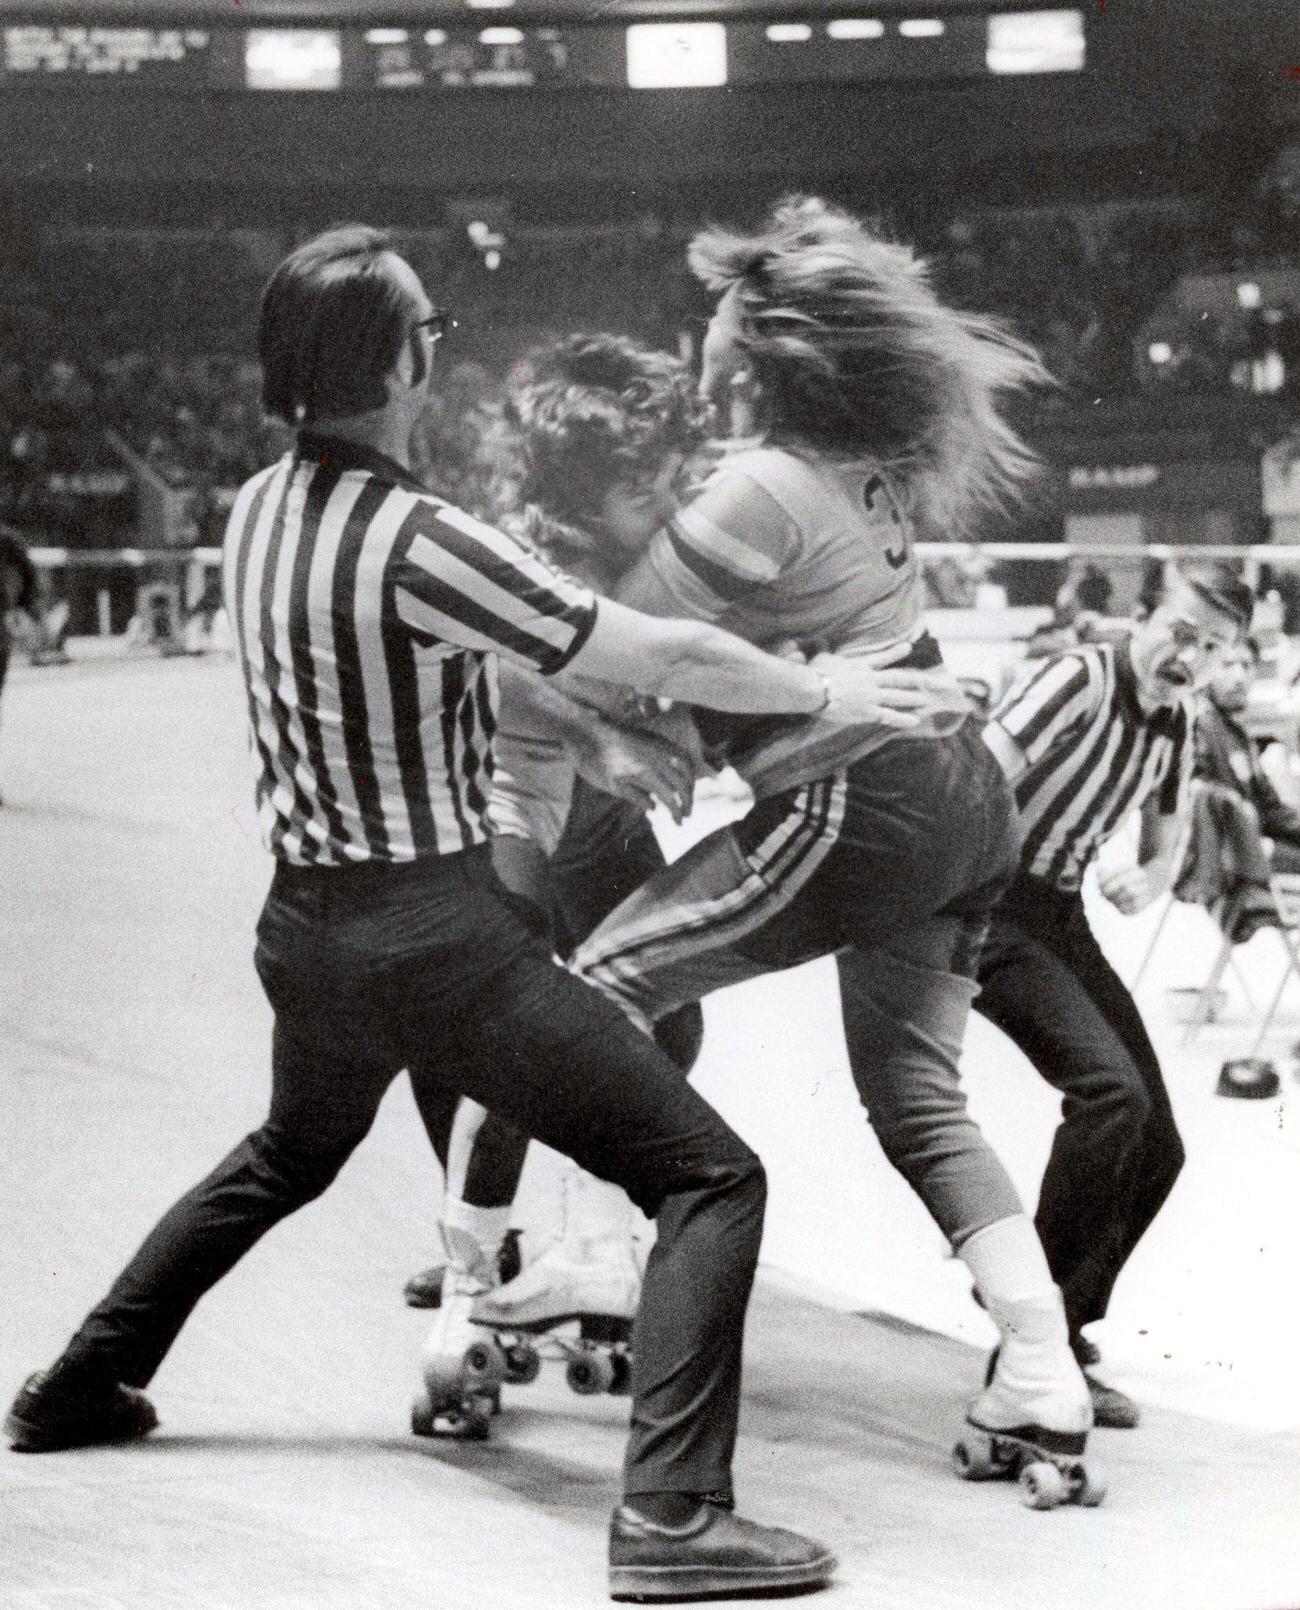 Women's Roller Derby Match Turns Into Fight, Madison Square Garden, New York, 1971